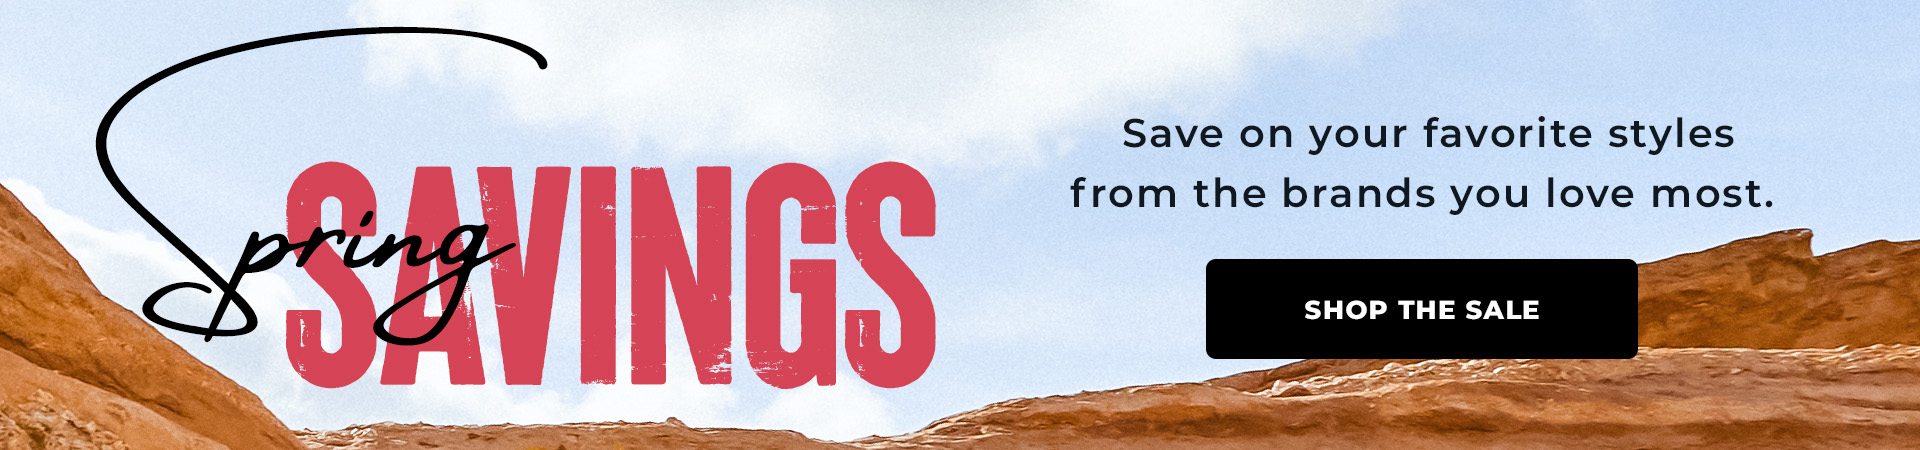 Save on your favorite styles from the brands you love most. ; SHOP THE S g E 